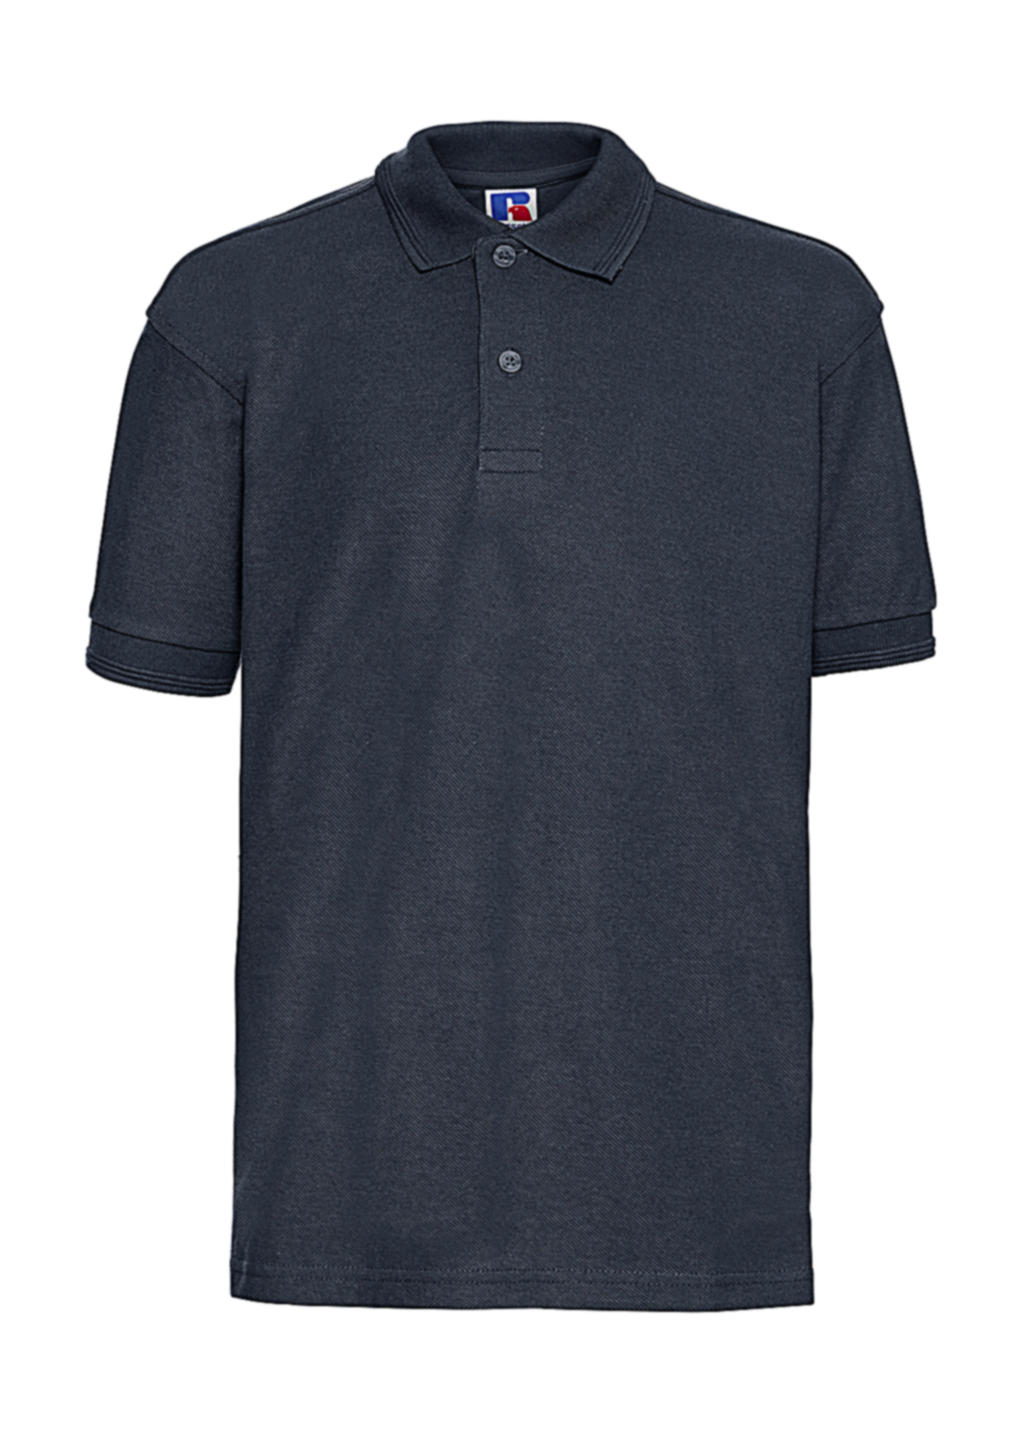  Kids Hardwearing Polycotton Polo in Farbe French Navy